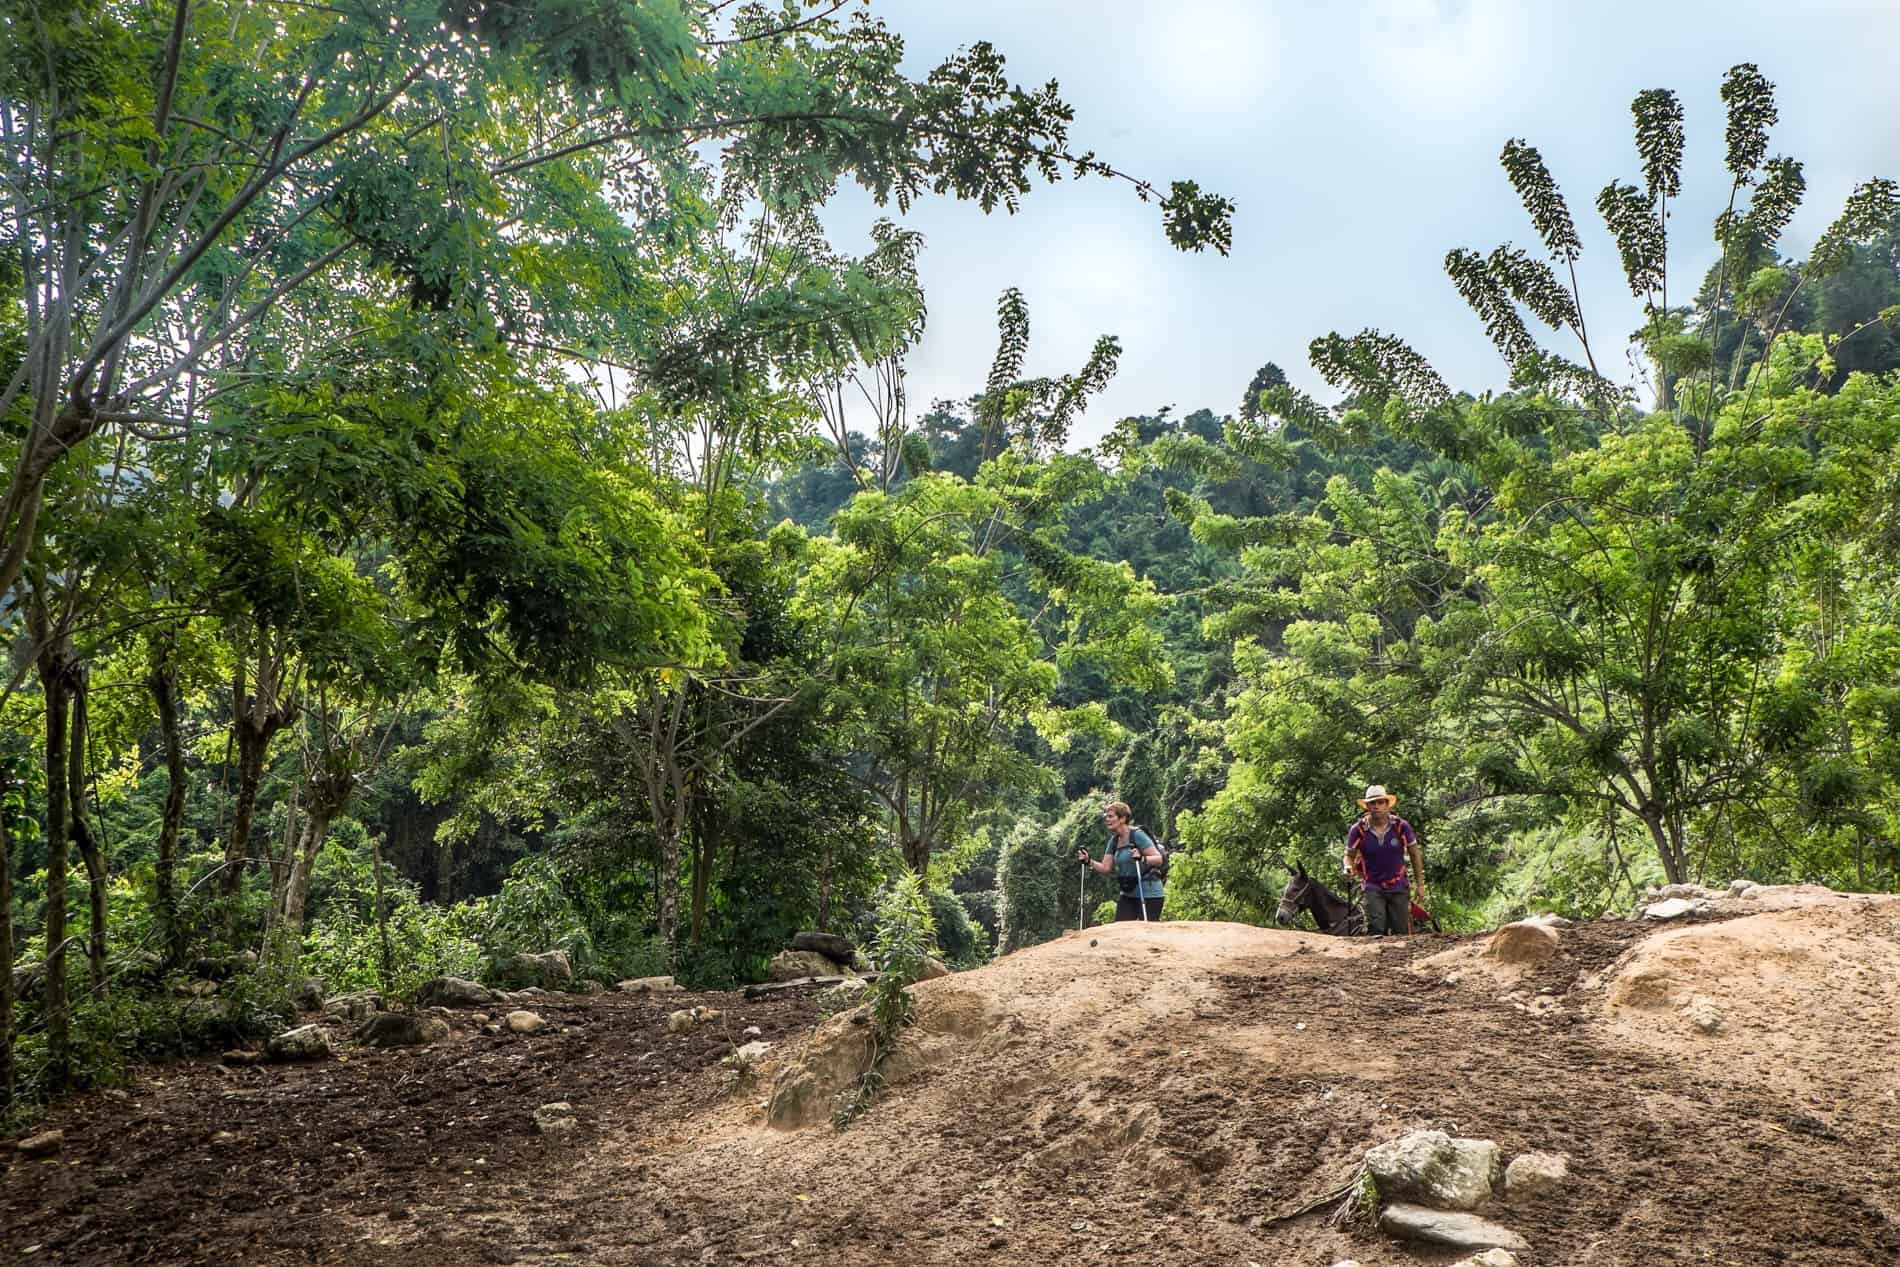 Two trekkers tackle hilly, rugged terrain on the Lost City trek in Colombia.